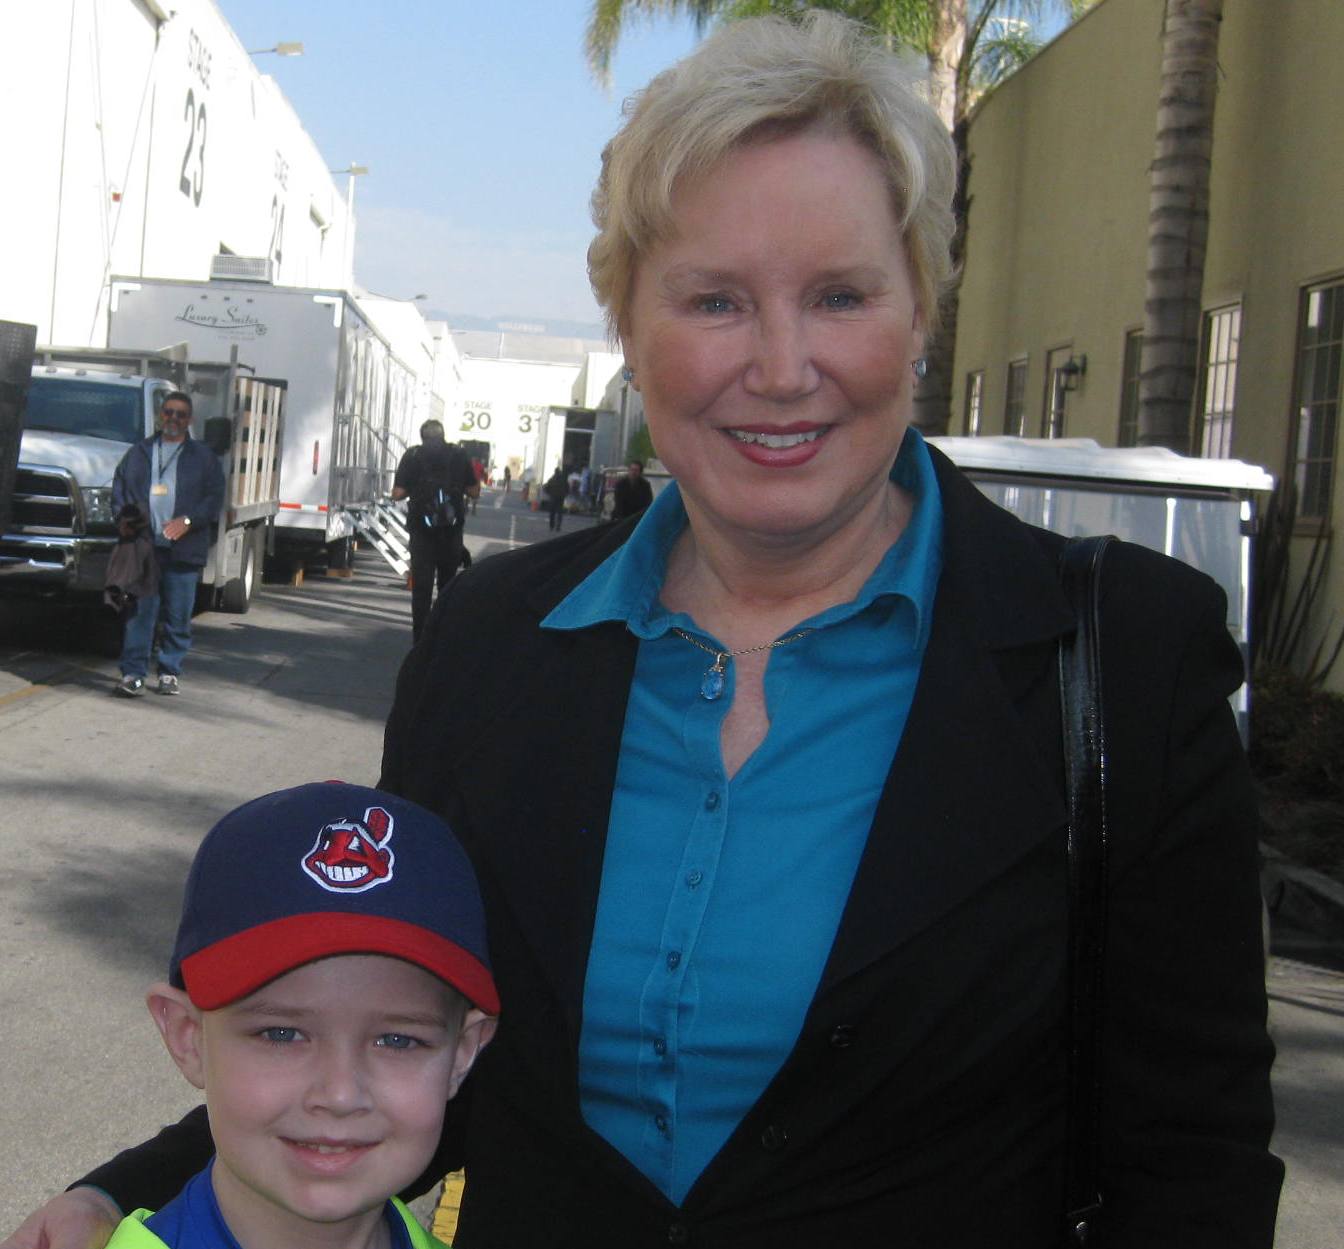 At Paramount Studios before the Movieguide Award Awards Ceremony with darling Connor Corum, who played the lead in Heaven is for Real,